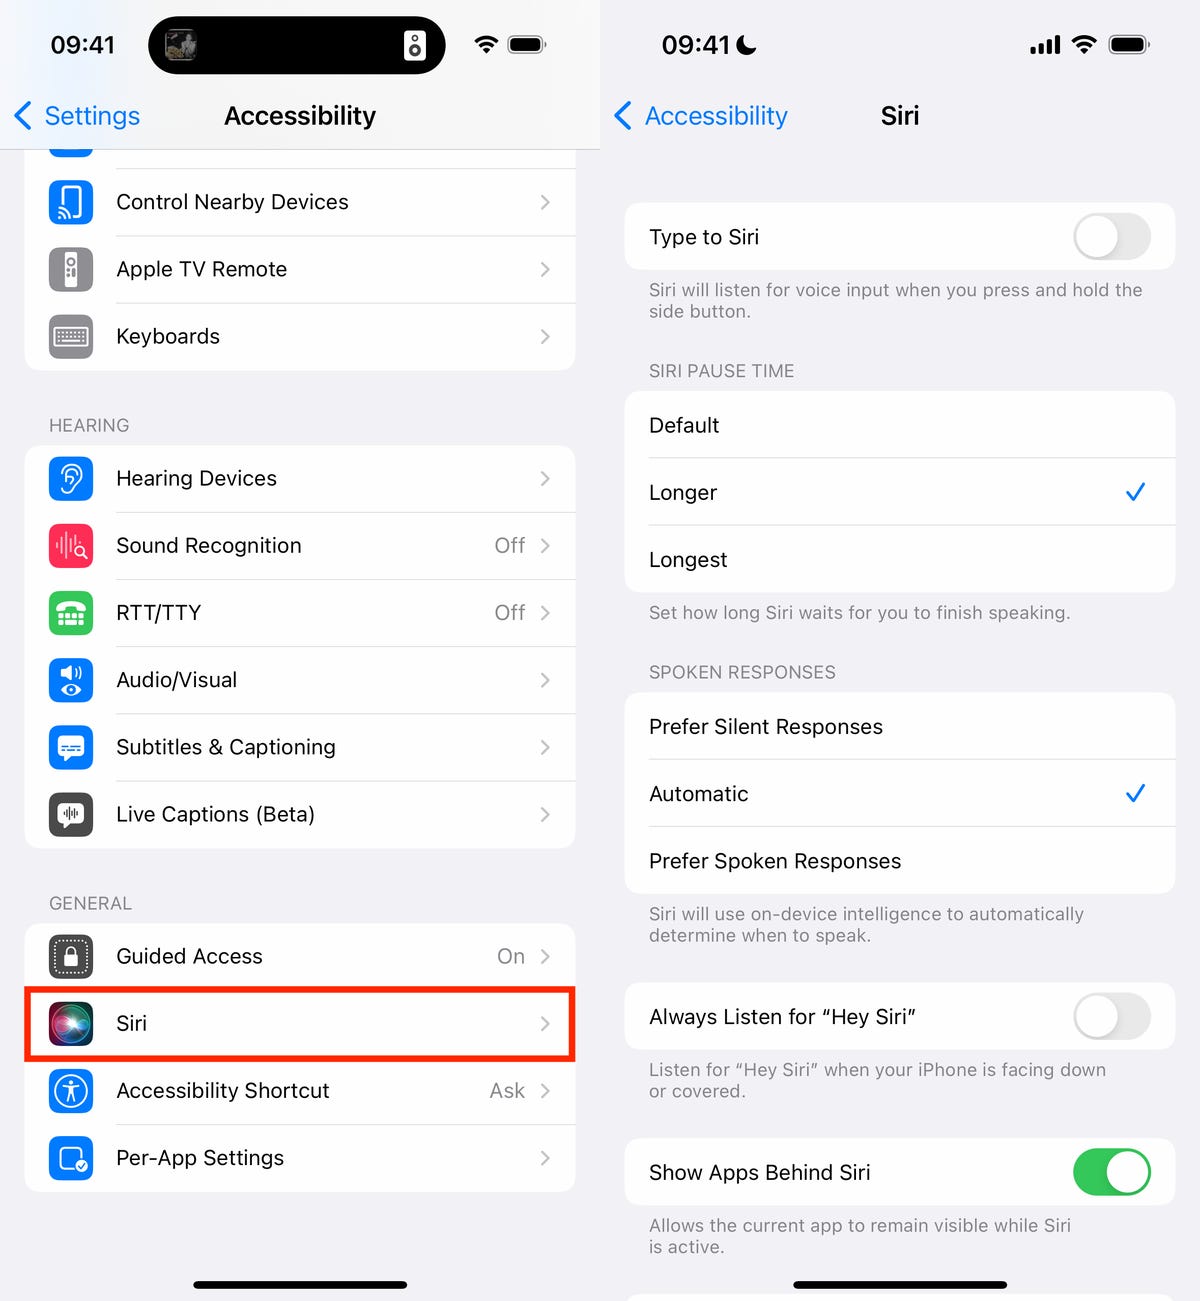 The Siri setting in Accessibility